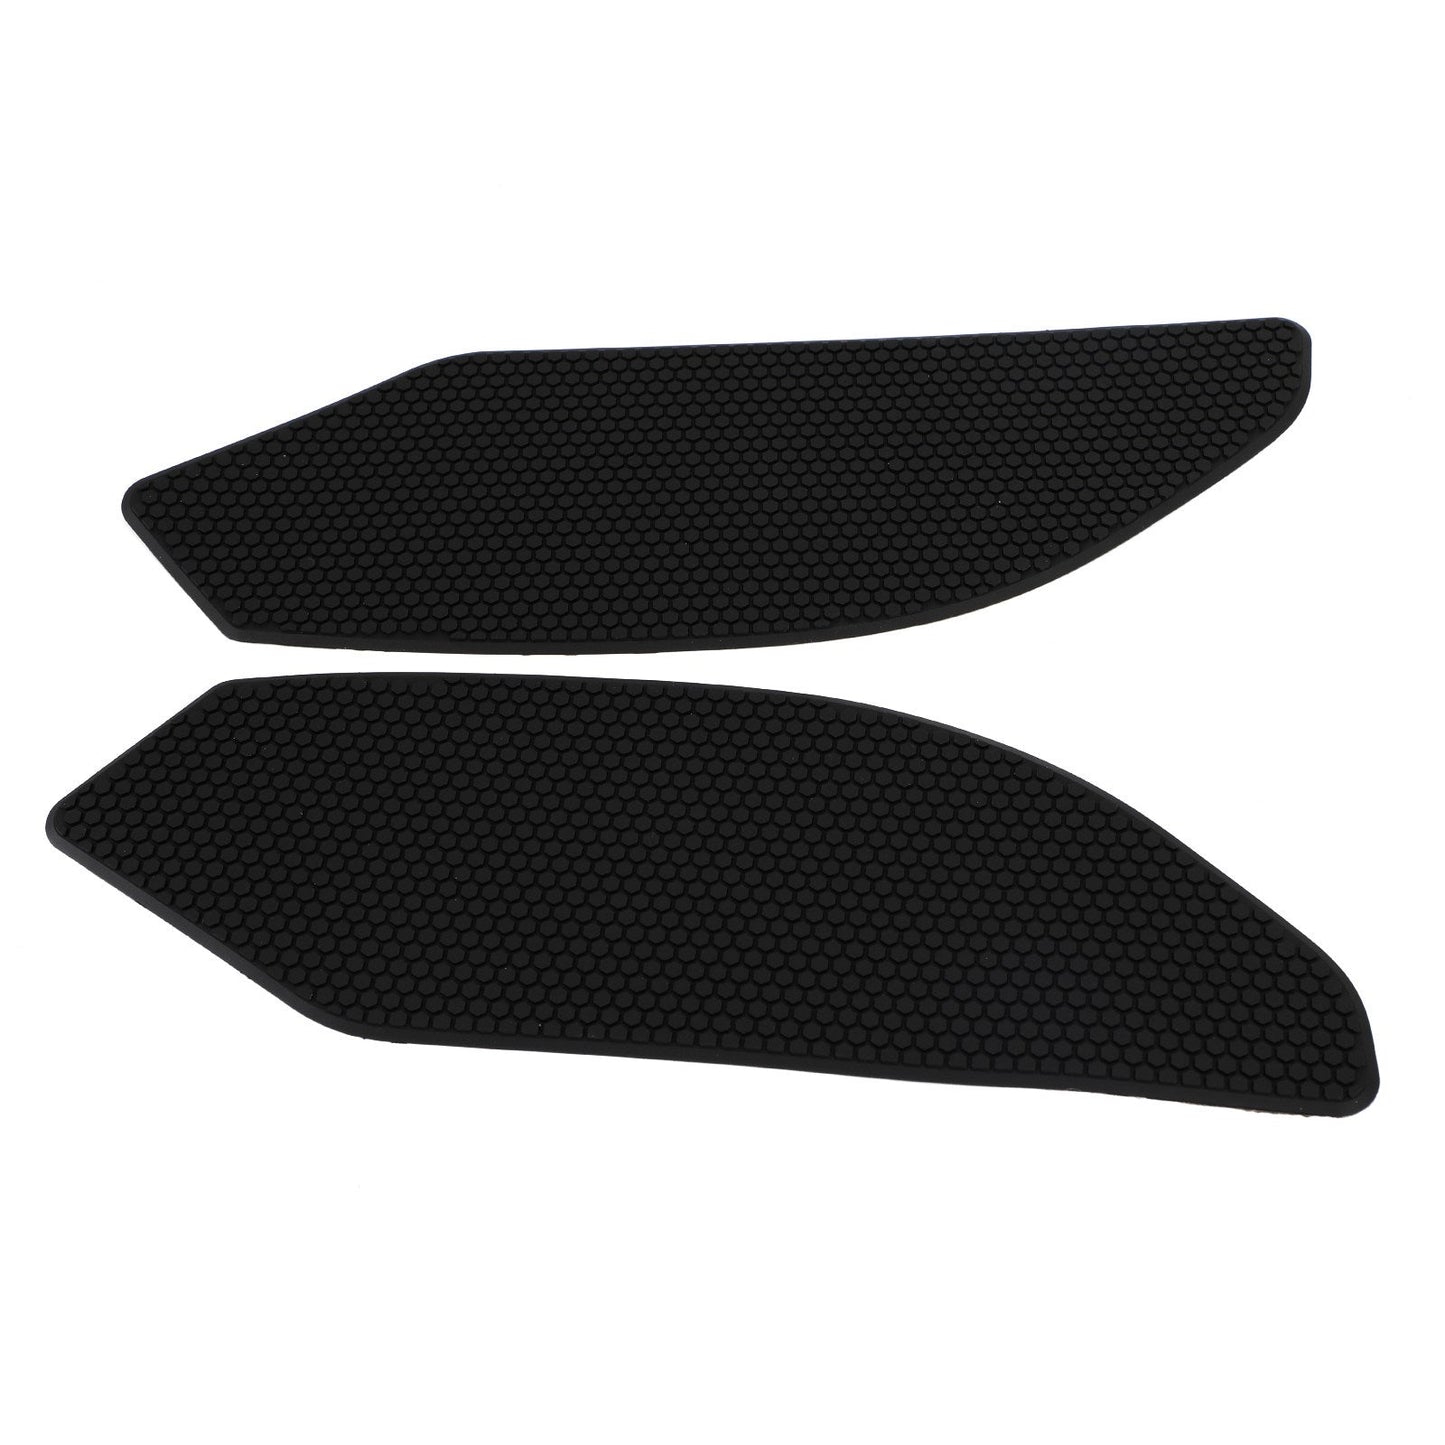 2x Side Tank Traction Grips Pads Fit for Suzuki GSXS1000 GSXS1000F 2014-2019